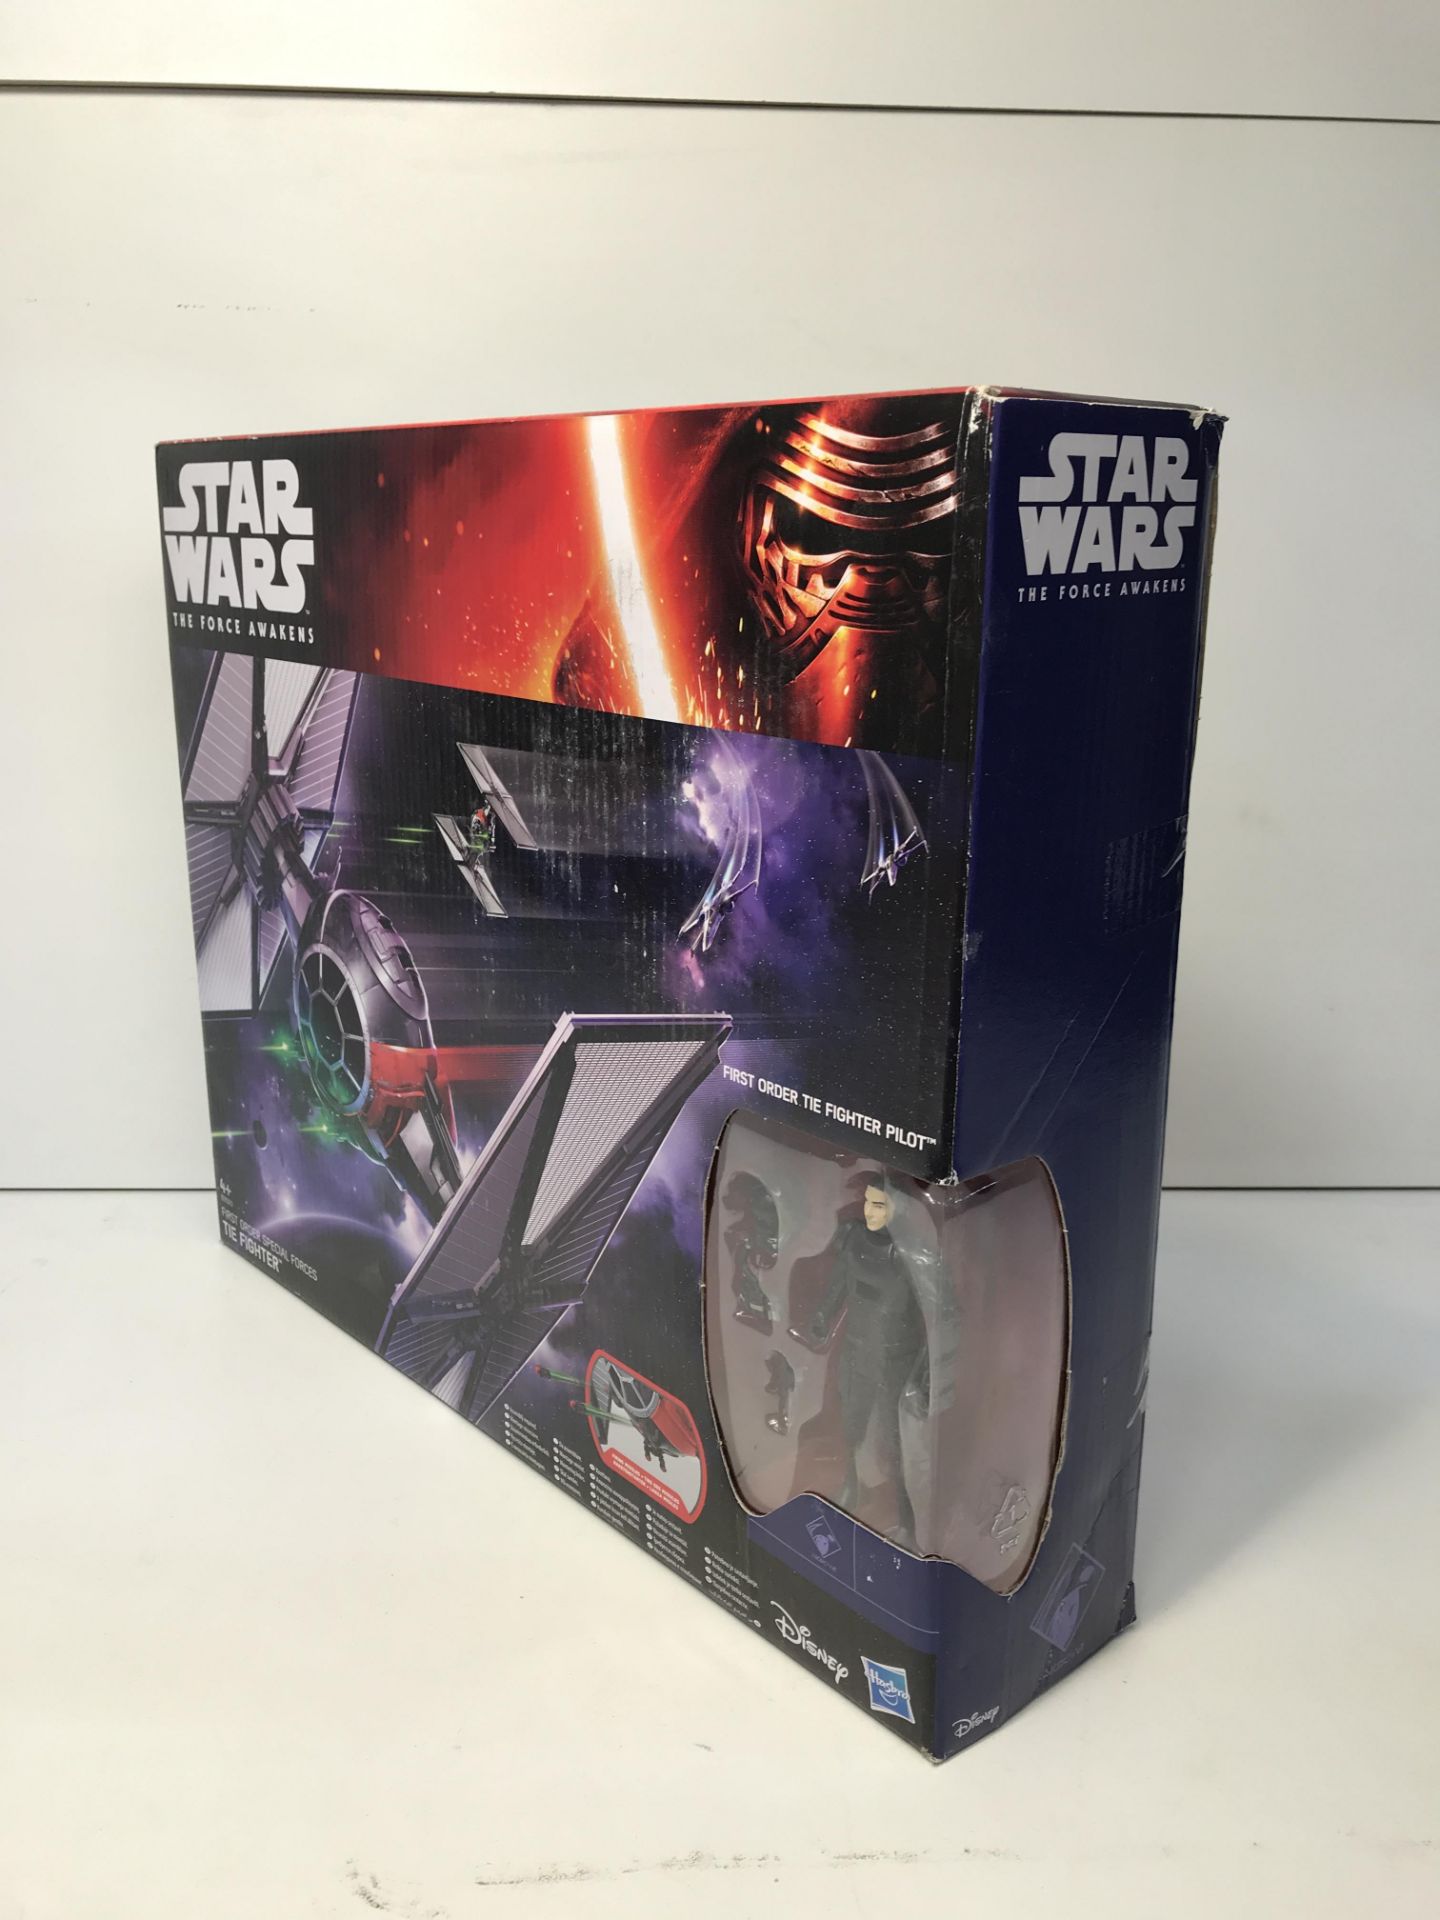 1 x Star Wars - B3920 - Force Awakens Tie Fighter Toy with First Order Pilot 3.75 Inch Action Figure - Image 5 of 5